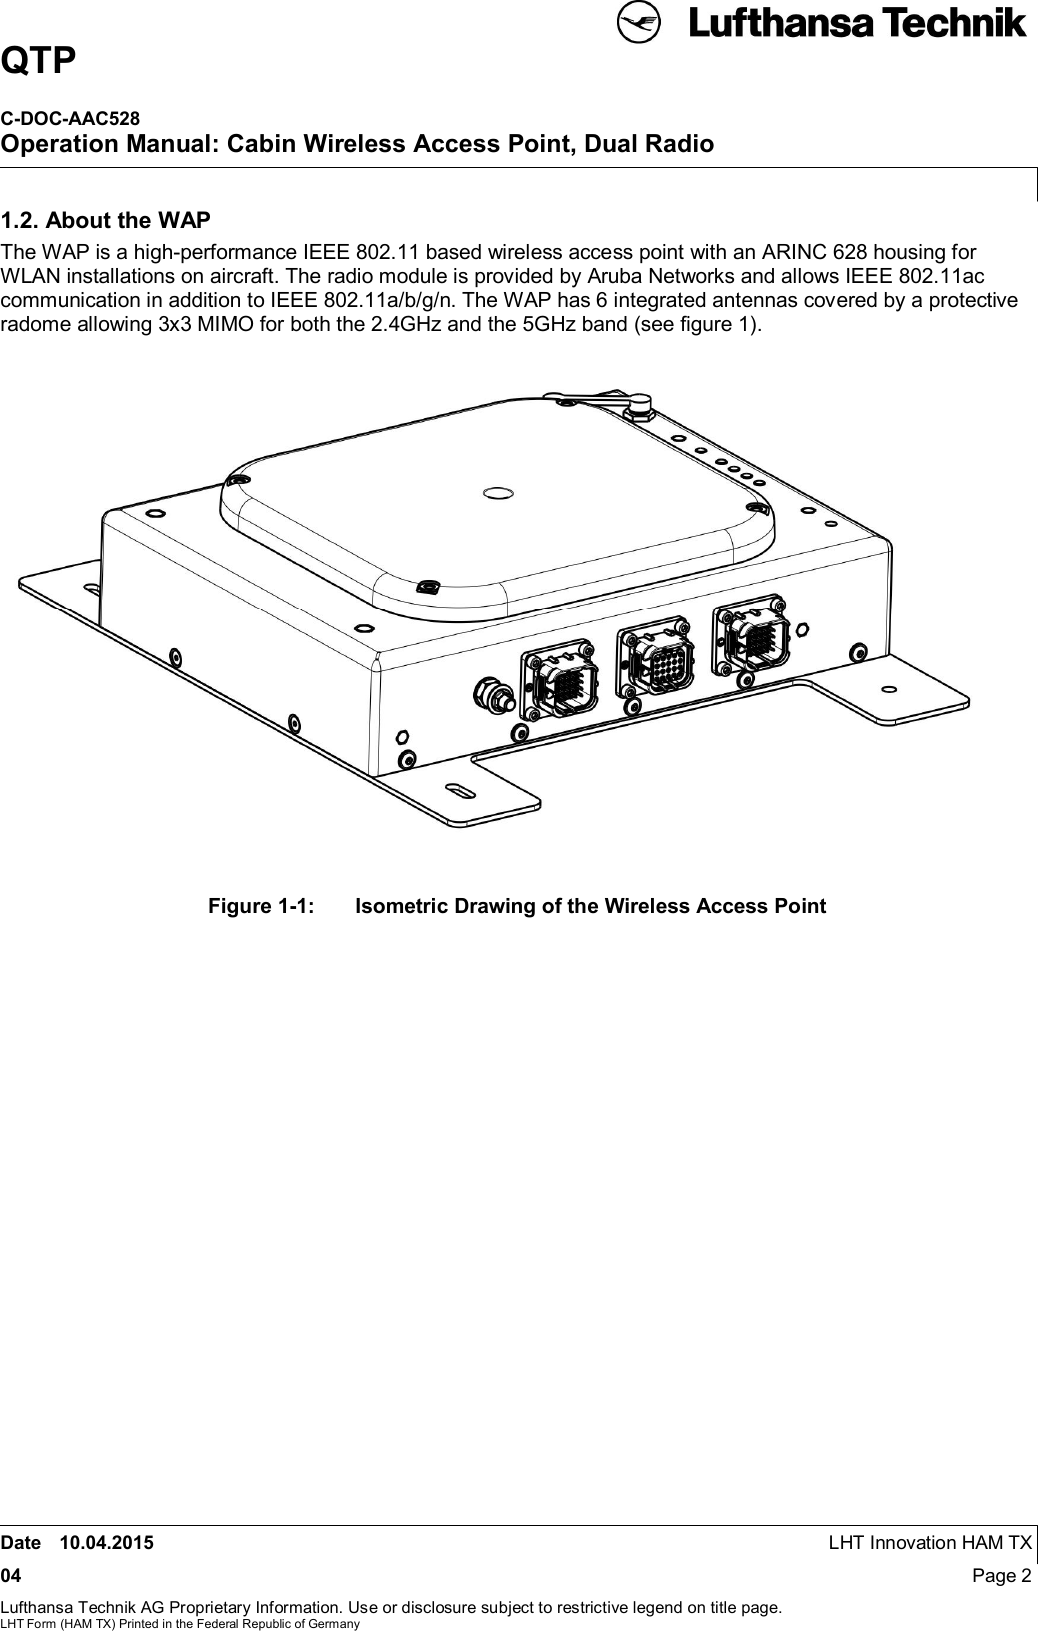 QTPC-DOC-AAC528Operation Manual: Cabin Wireless Access Point, Dual RadioDate 10.04.2015 LHT Innovation HAM TX04 Page 2Lufthansa Technik AG Proprietary Information. Use or disclosure subject to restrictive legend on title page.LHT Form (HAM TX) Printed in the Federal Republic of Germany1.2. About the WAPThe WAP is a high-performance IEEE 802.11 based wireless access point with an ARINC 628 housing forWLAN installations on aircraft. The radio module is provided by Aruba Networks and allows IEEE 802.11accommunication in addition to IEEE 802.11a/b/g/n. The WAP has 6 integrated antennas covered by a protectiveradome allowing 3x3 MIMO for both the 2.4GHz and the 5GHz band (see ﬁgure 1).Figure 1-1:  Isometric Drawing of the Wireless Access Point